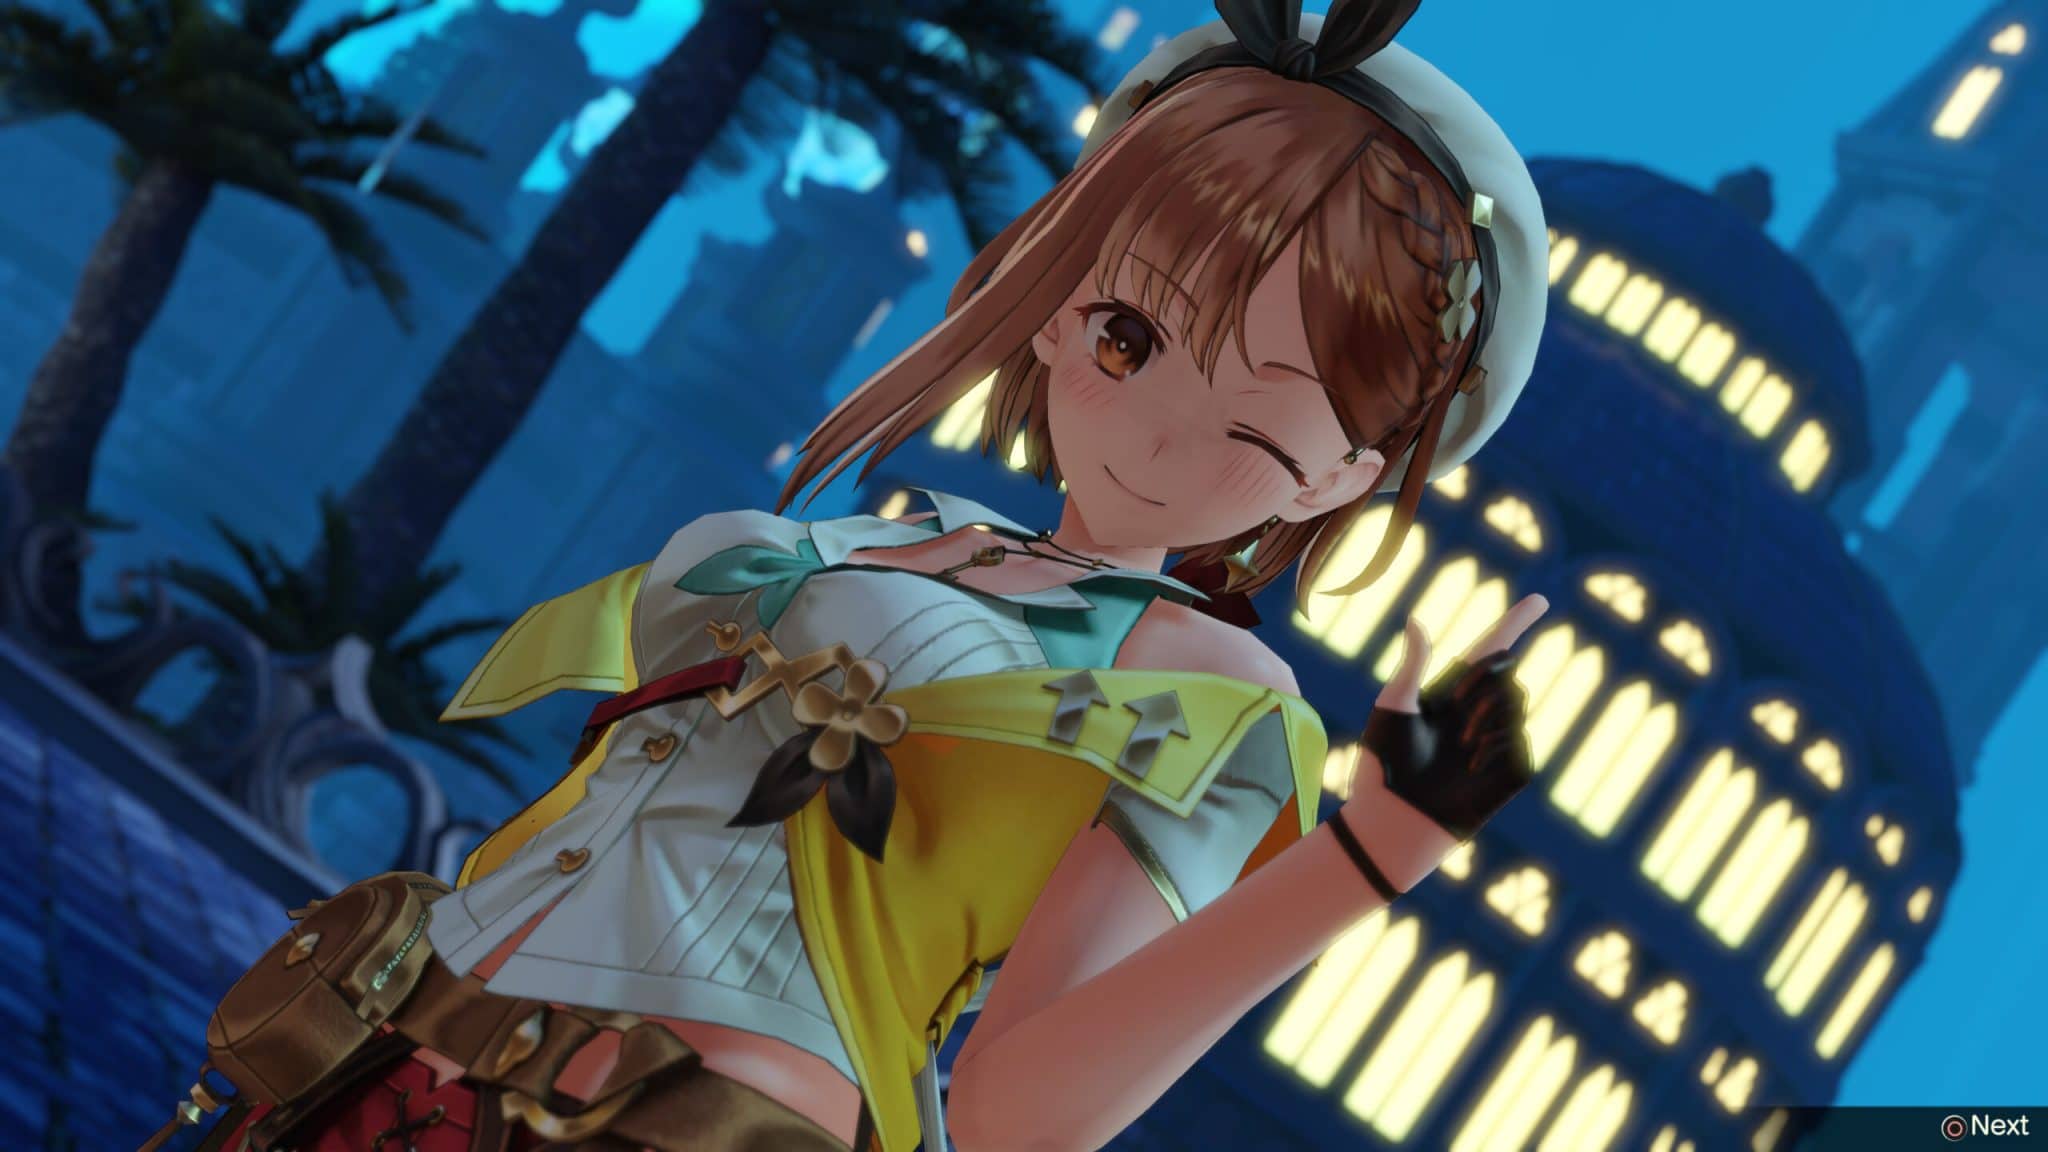 Atelier Ryza 2 Sets Up the New Adventure With Theme Song Cinematic Trailer